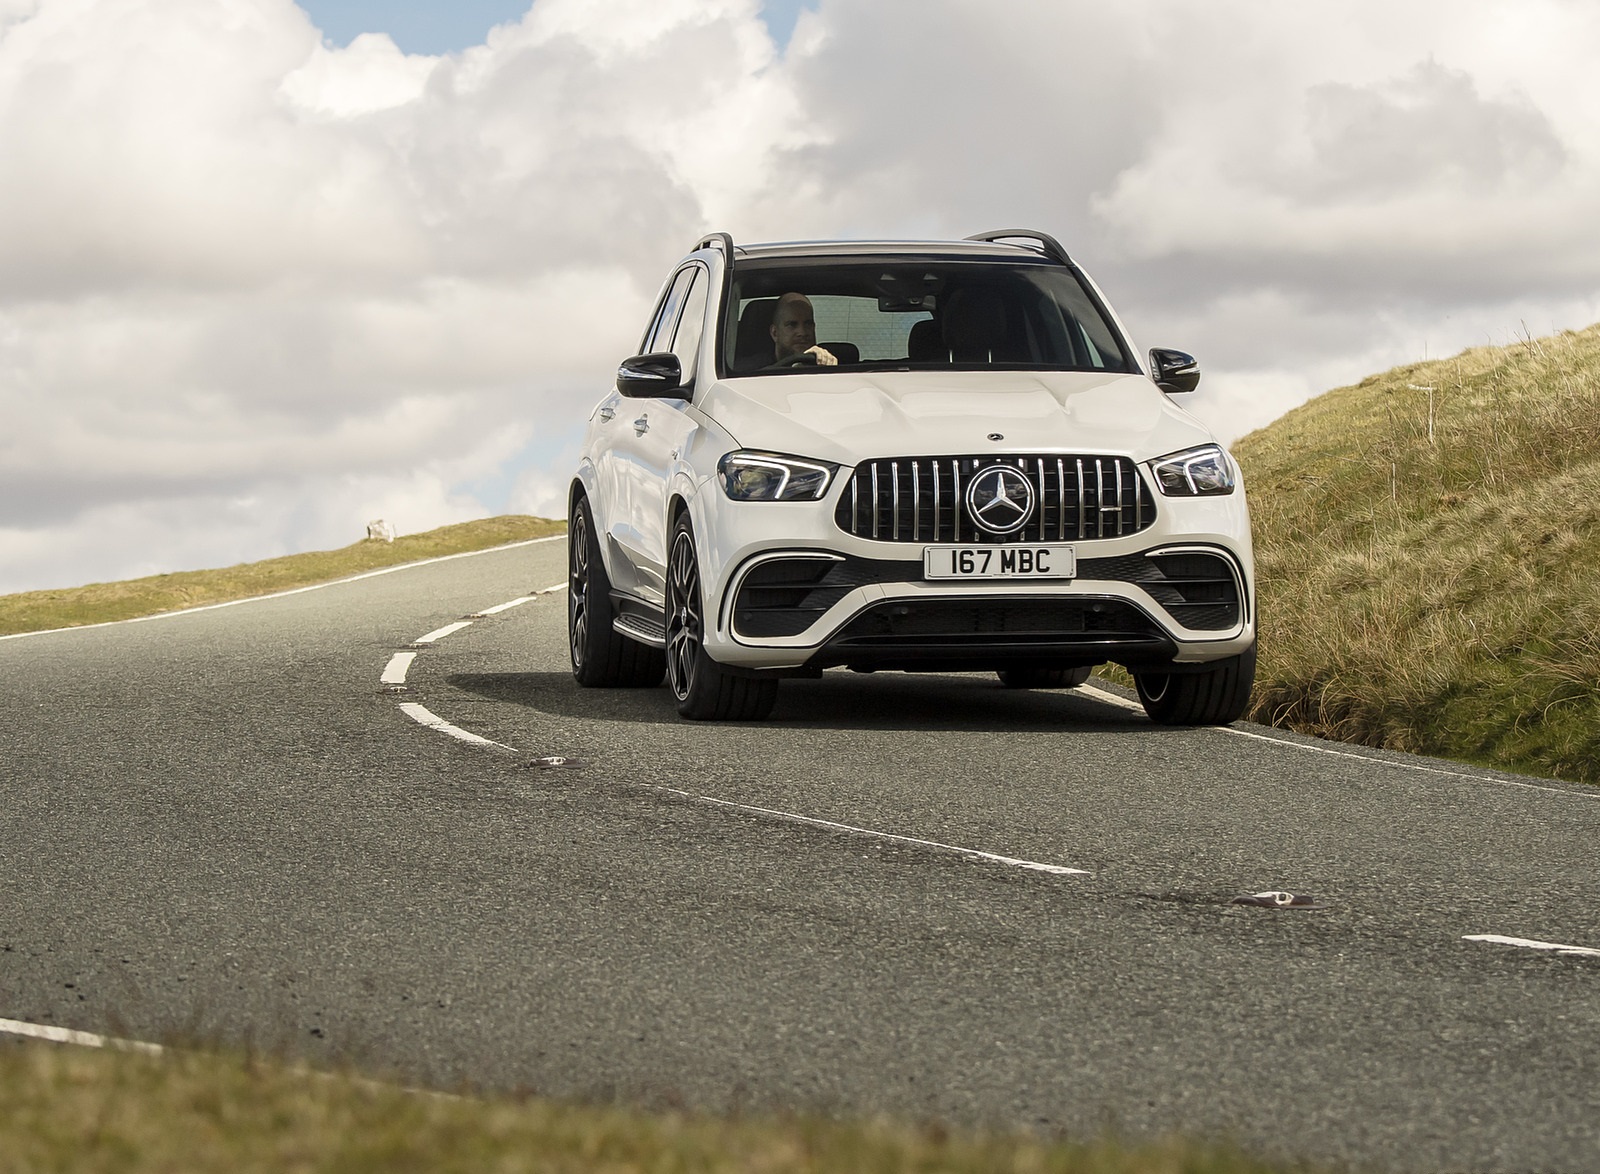 2021 Mercedes-AMG GLE 63 S 4MATIC (UK-Spec) Front Wallpapers (10)